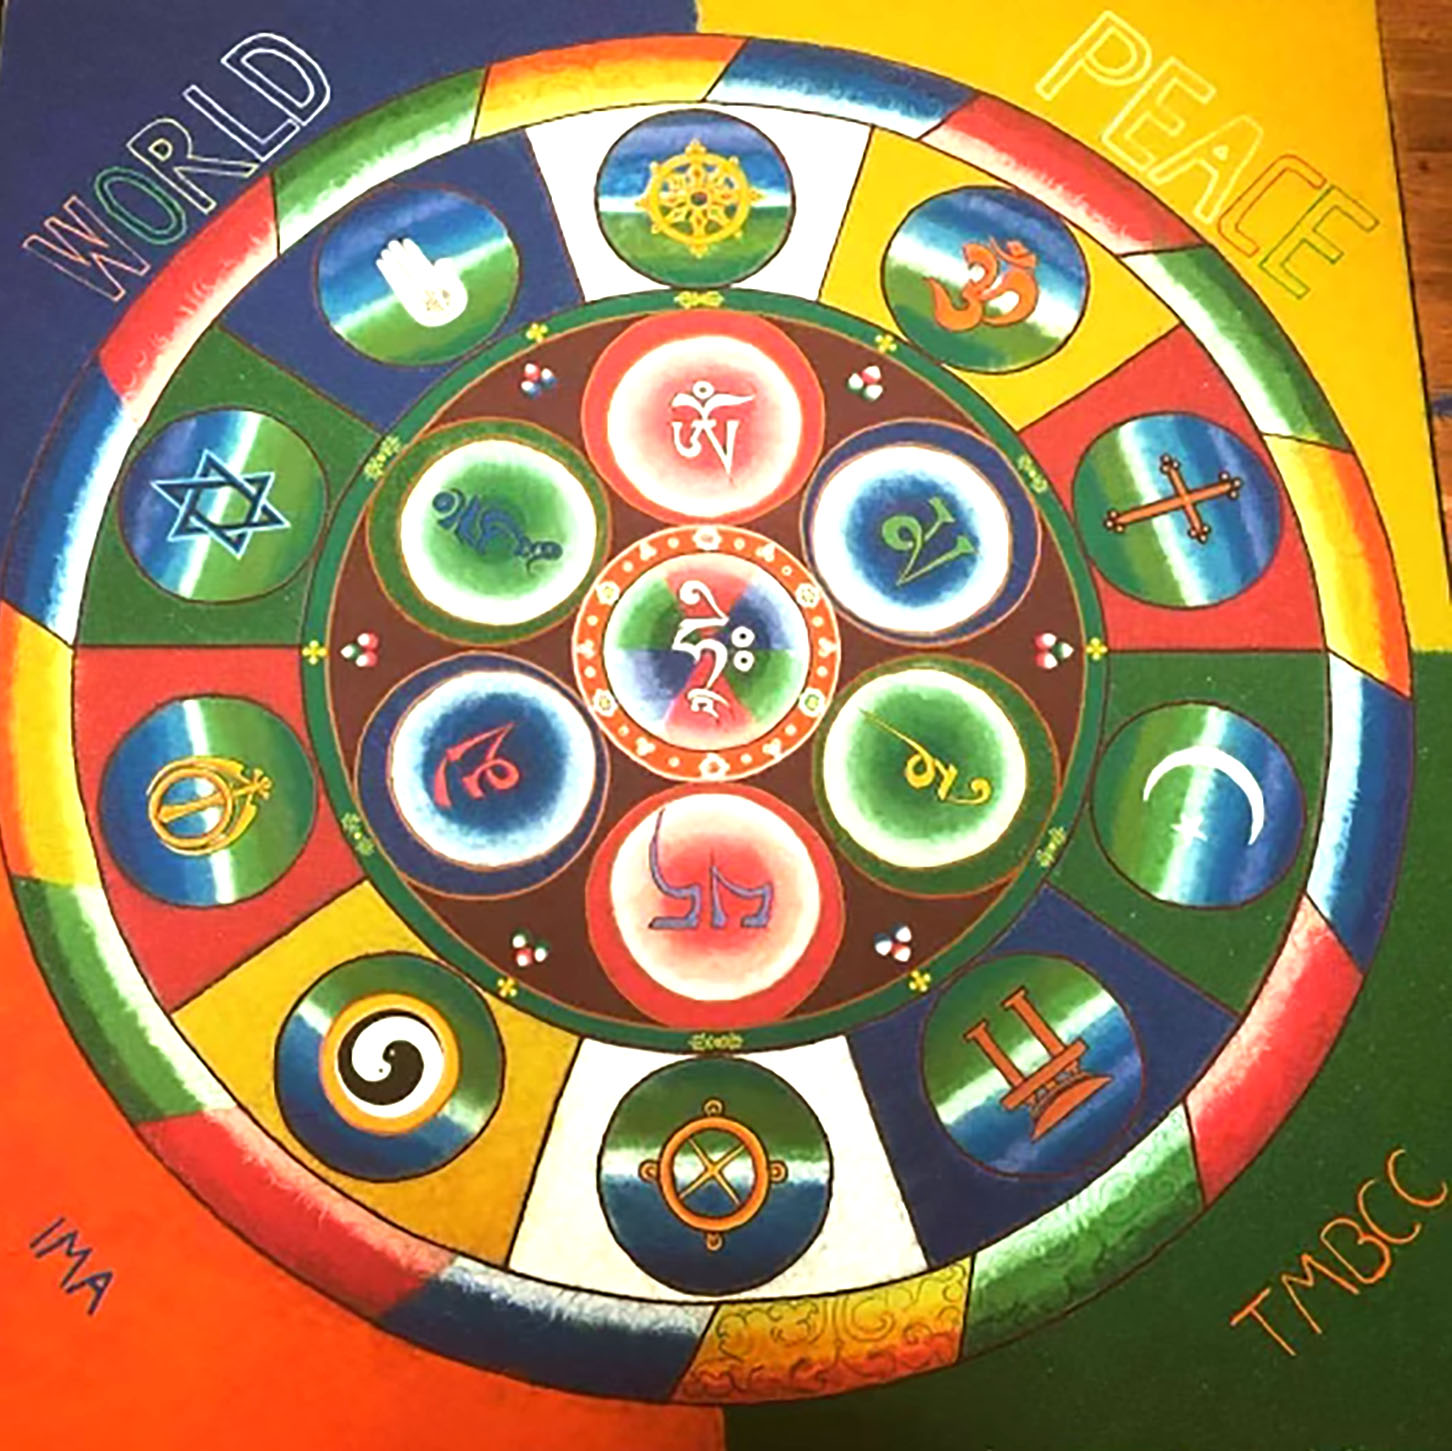 The Making of a Sand Mandala: Closing Ceremony